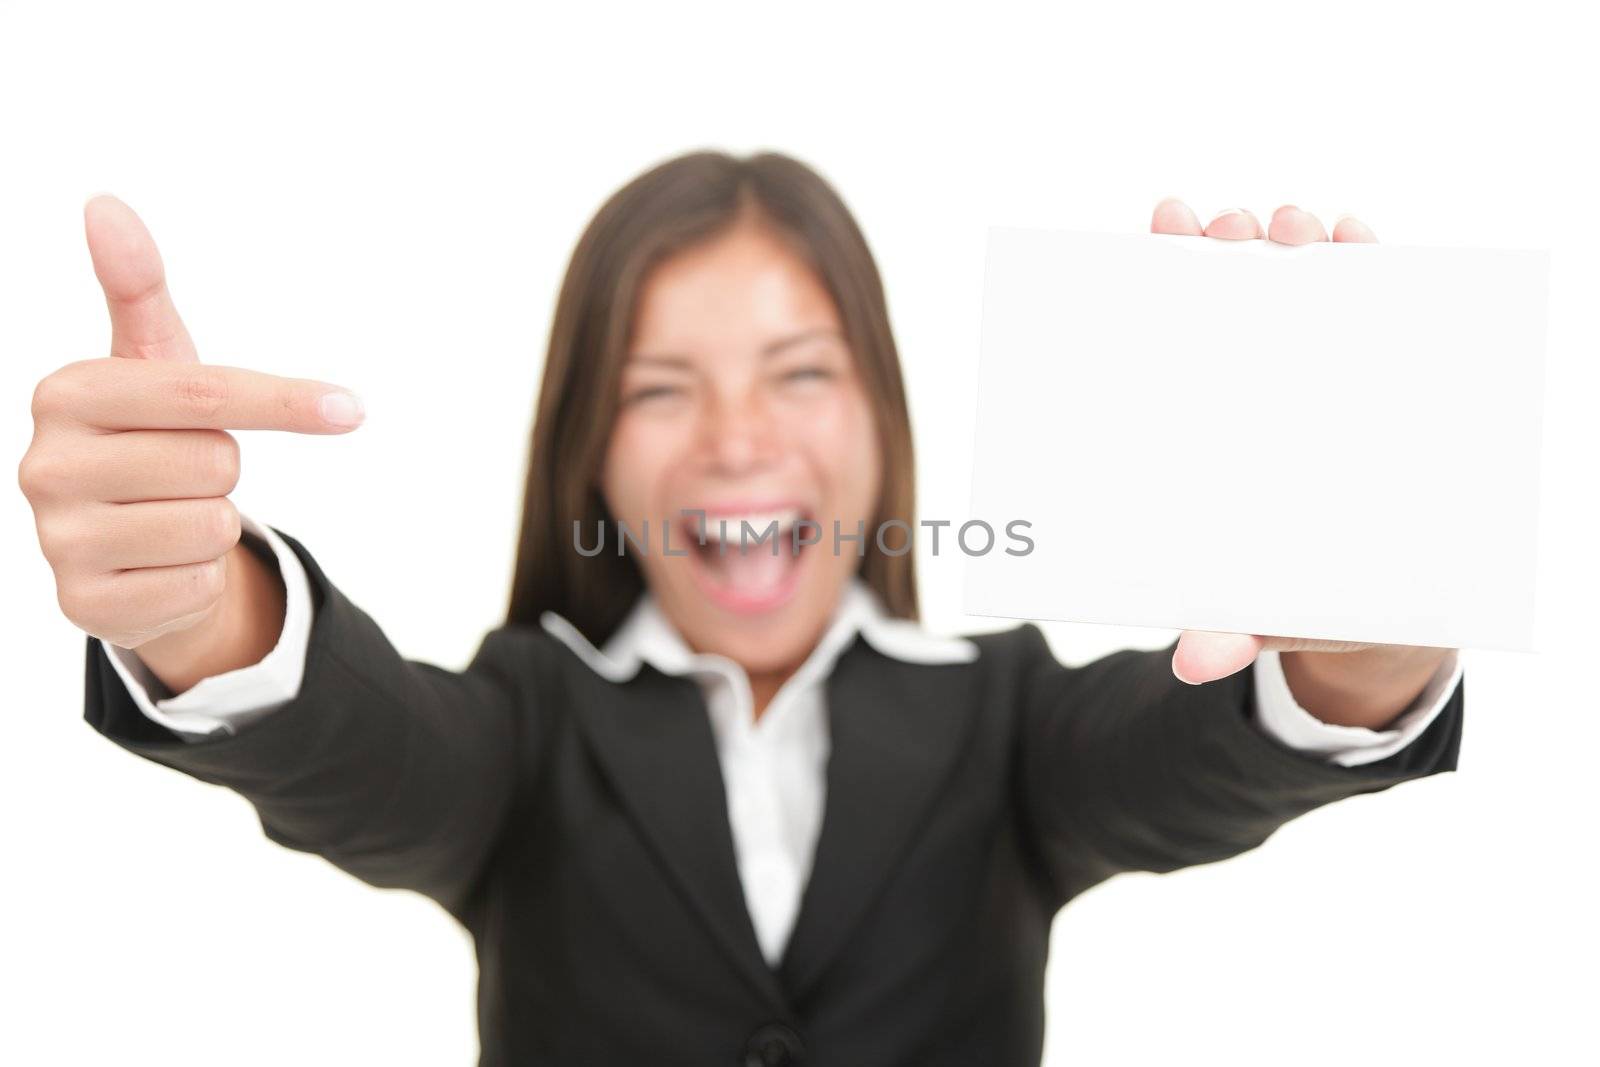 Business card. Excited woman pointing at business card / blank empty sign. Isolated on white background, focus on hand and card.